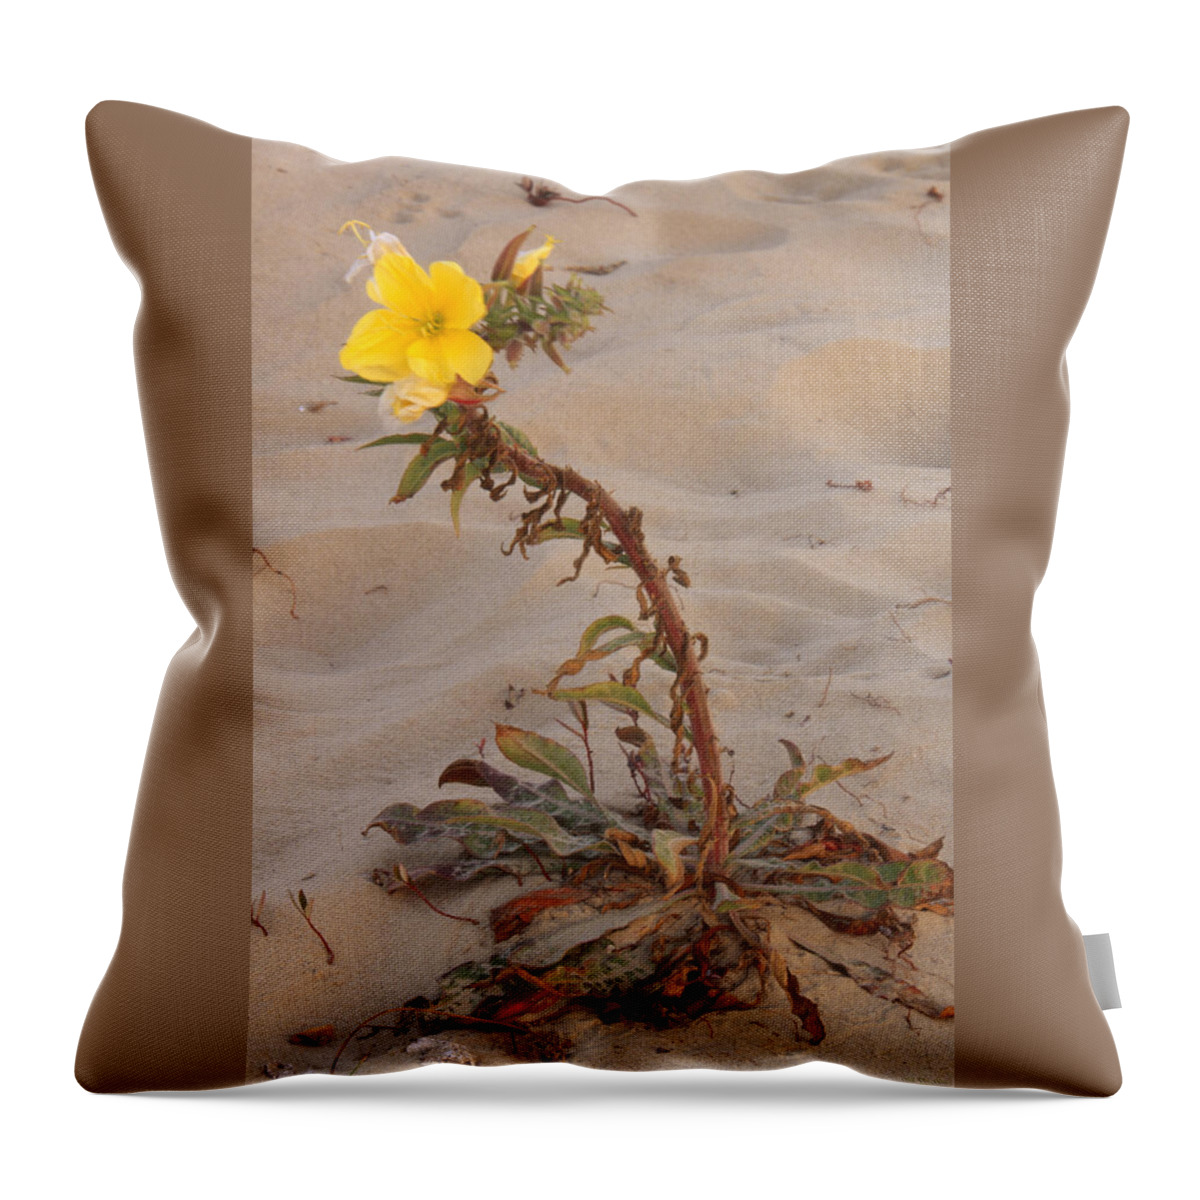 Flower Throw Pillow featuring the photograph Forget Where - California by Soli Deo Gloria Wilderness And Wildlife Photography